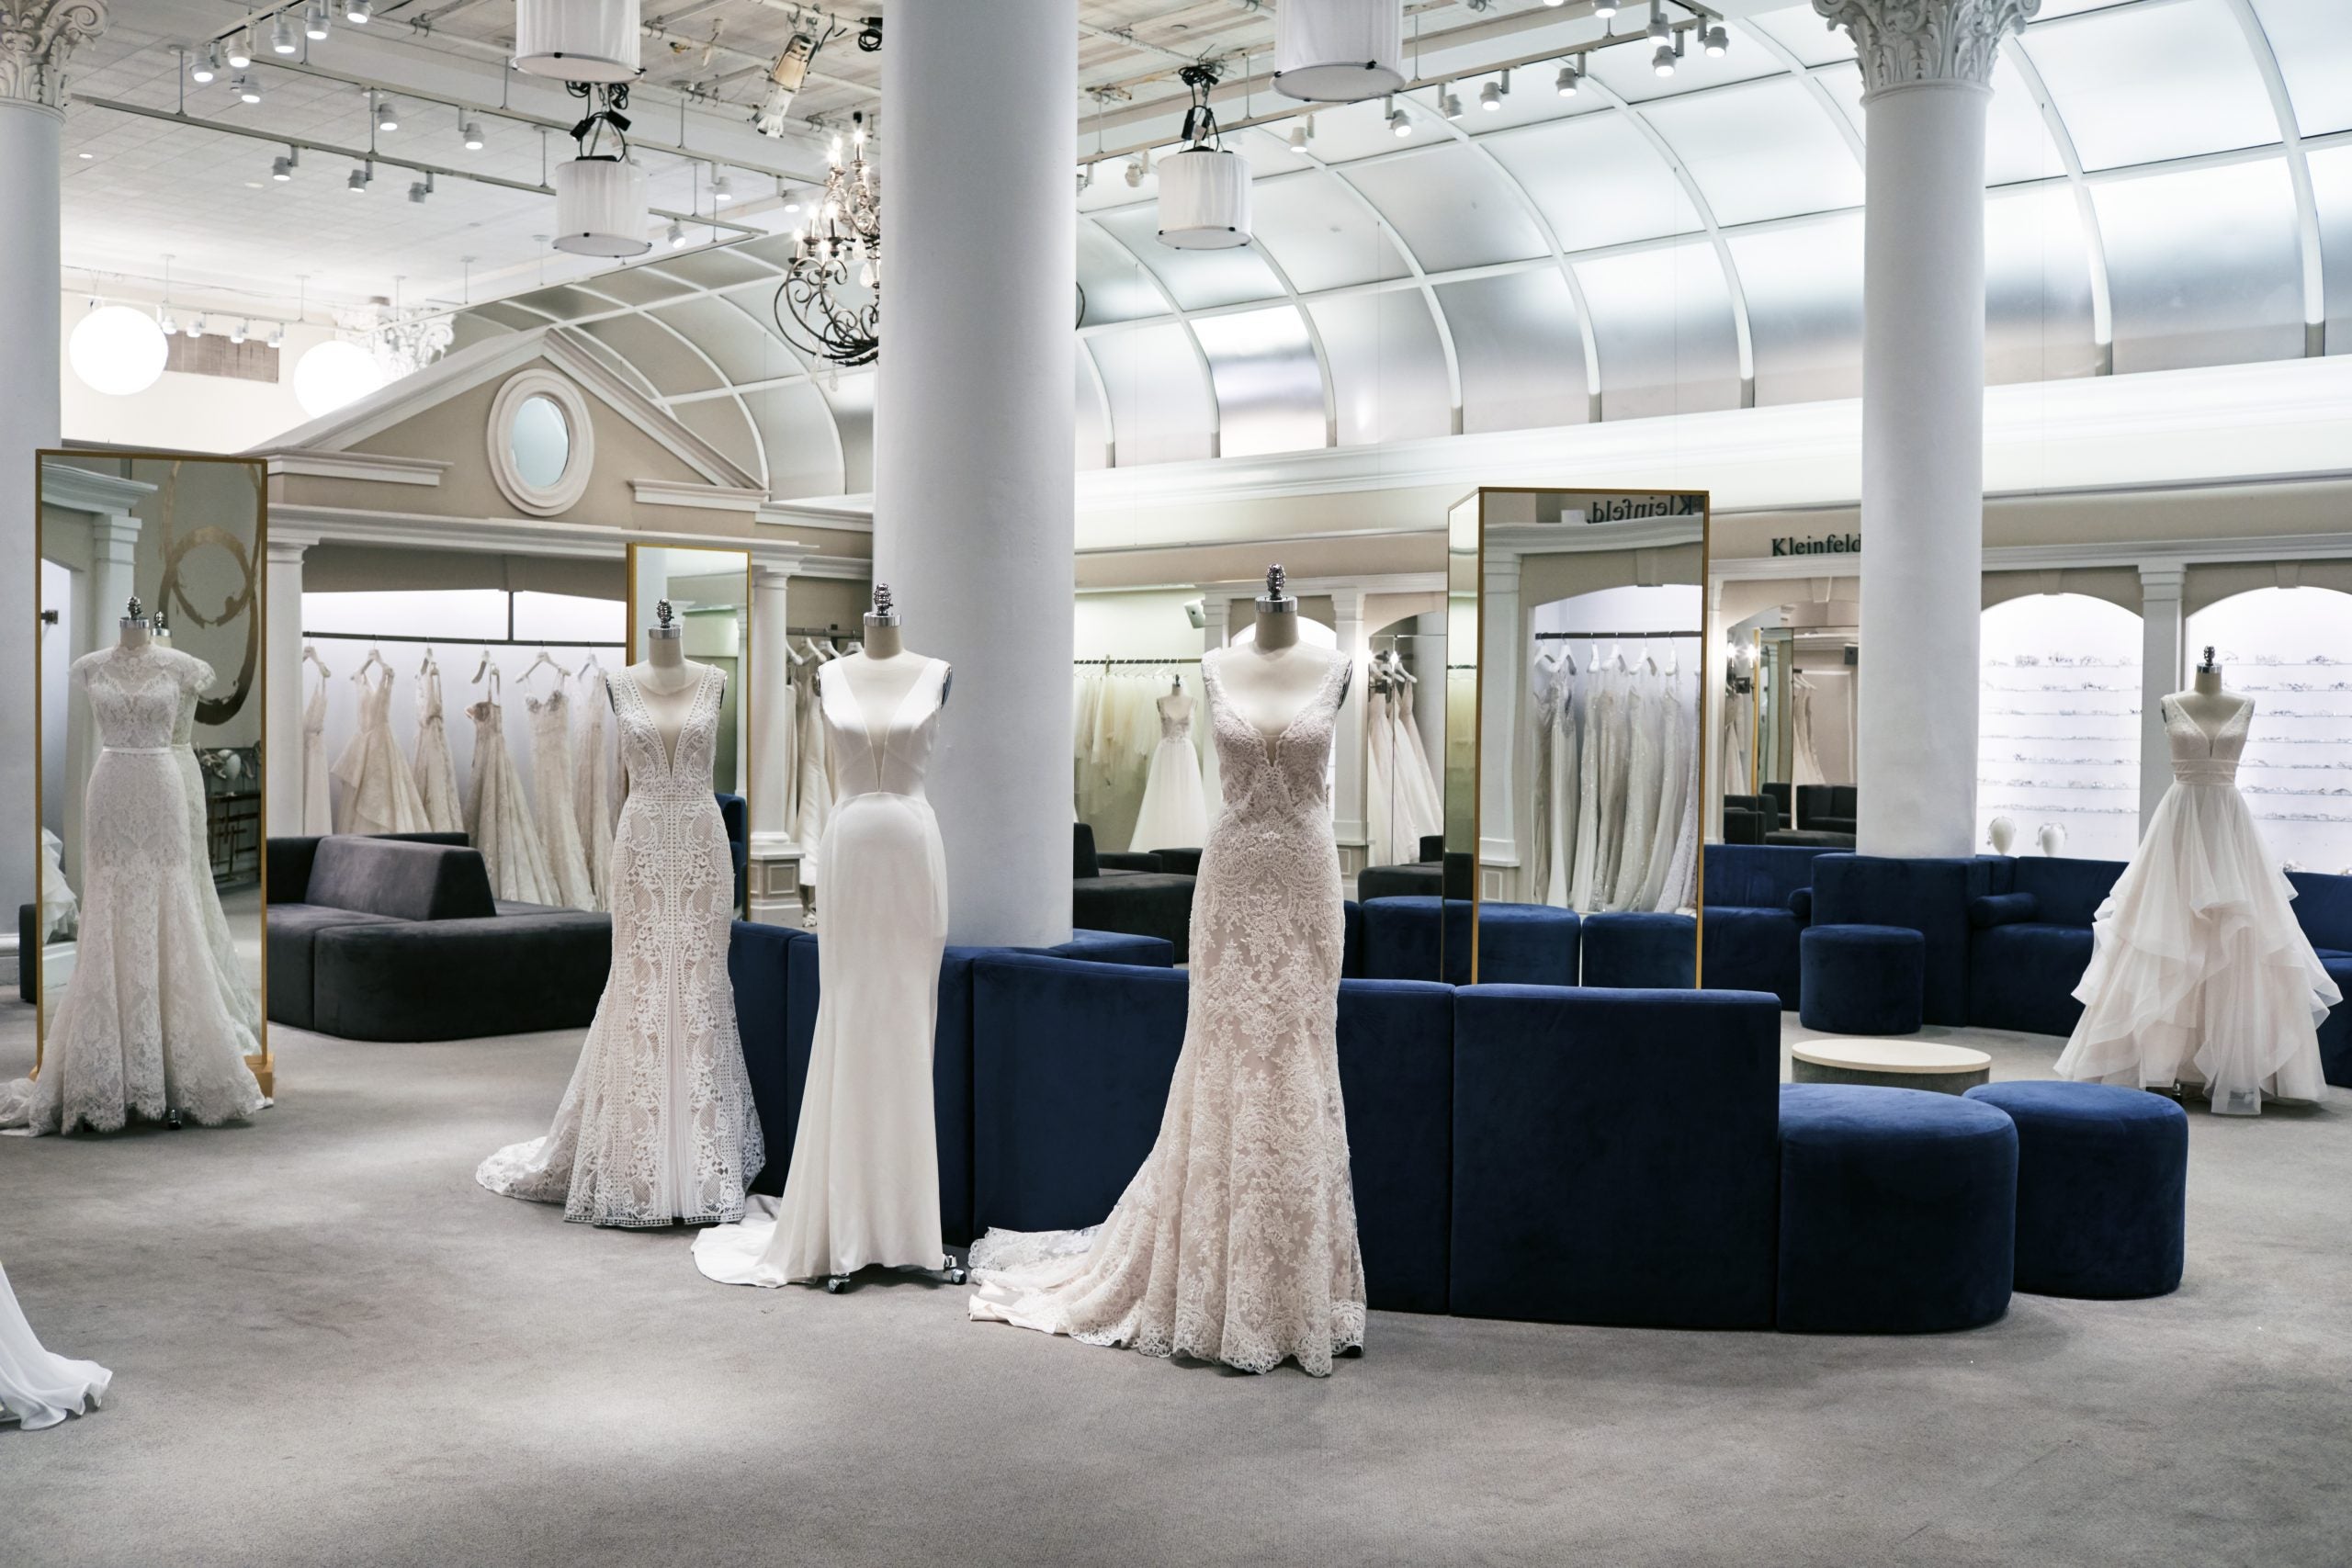 Kleinfeld Bridal The Largest Selection Of Wedding Dresses In The World